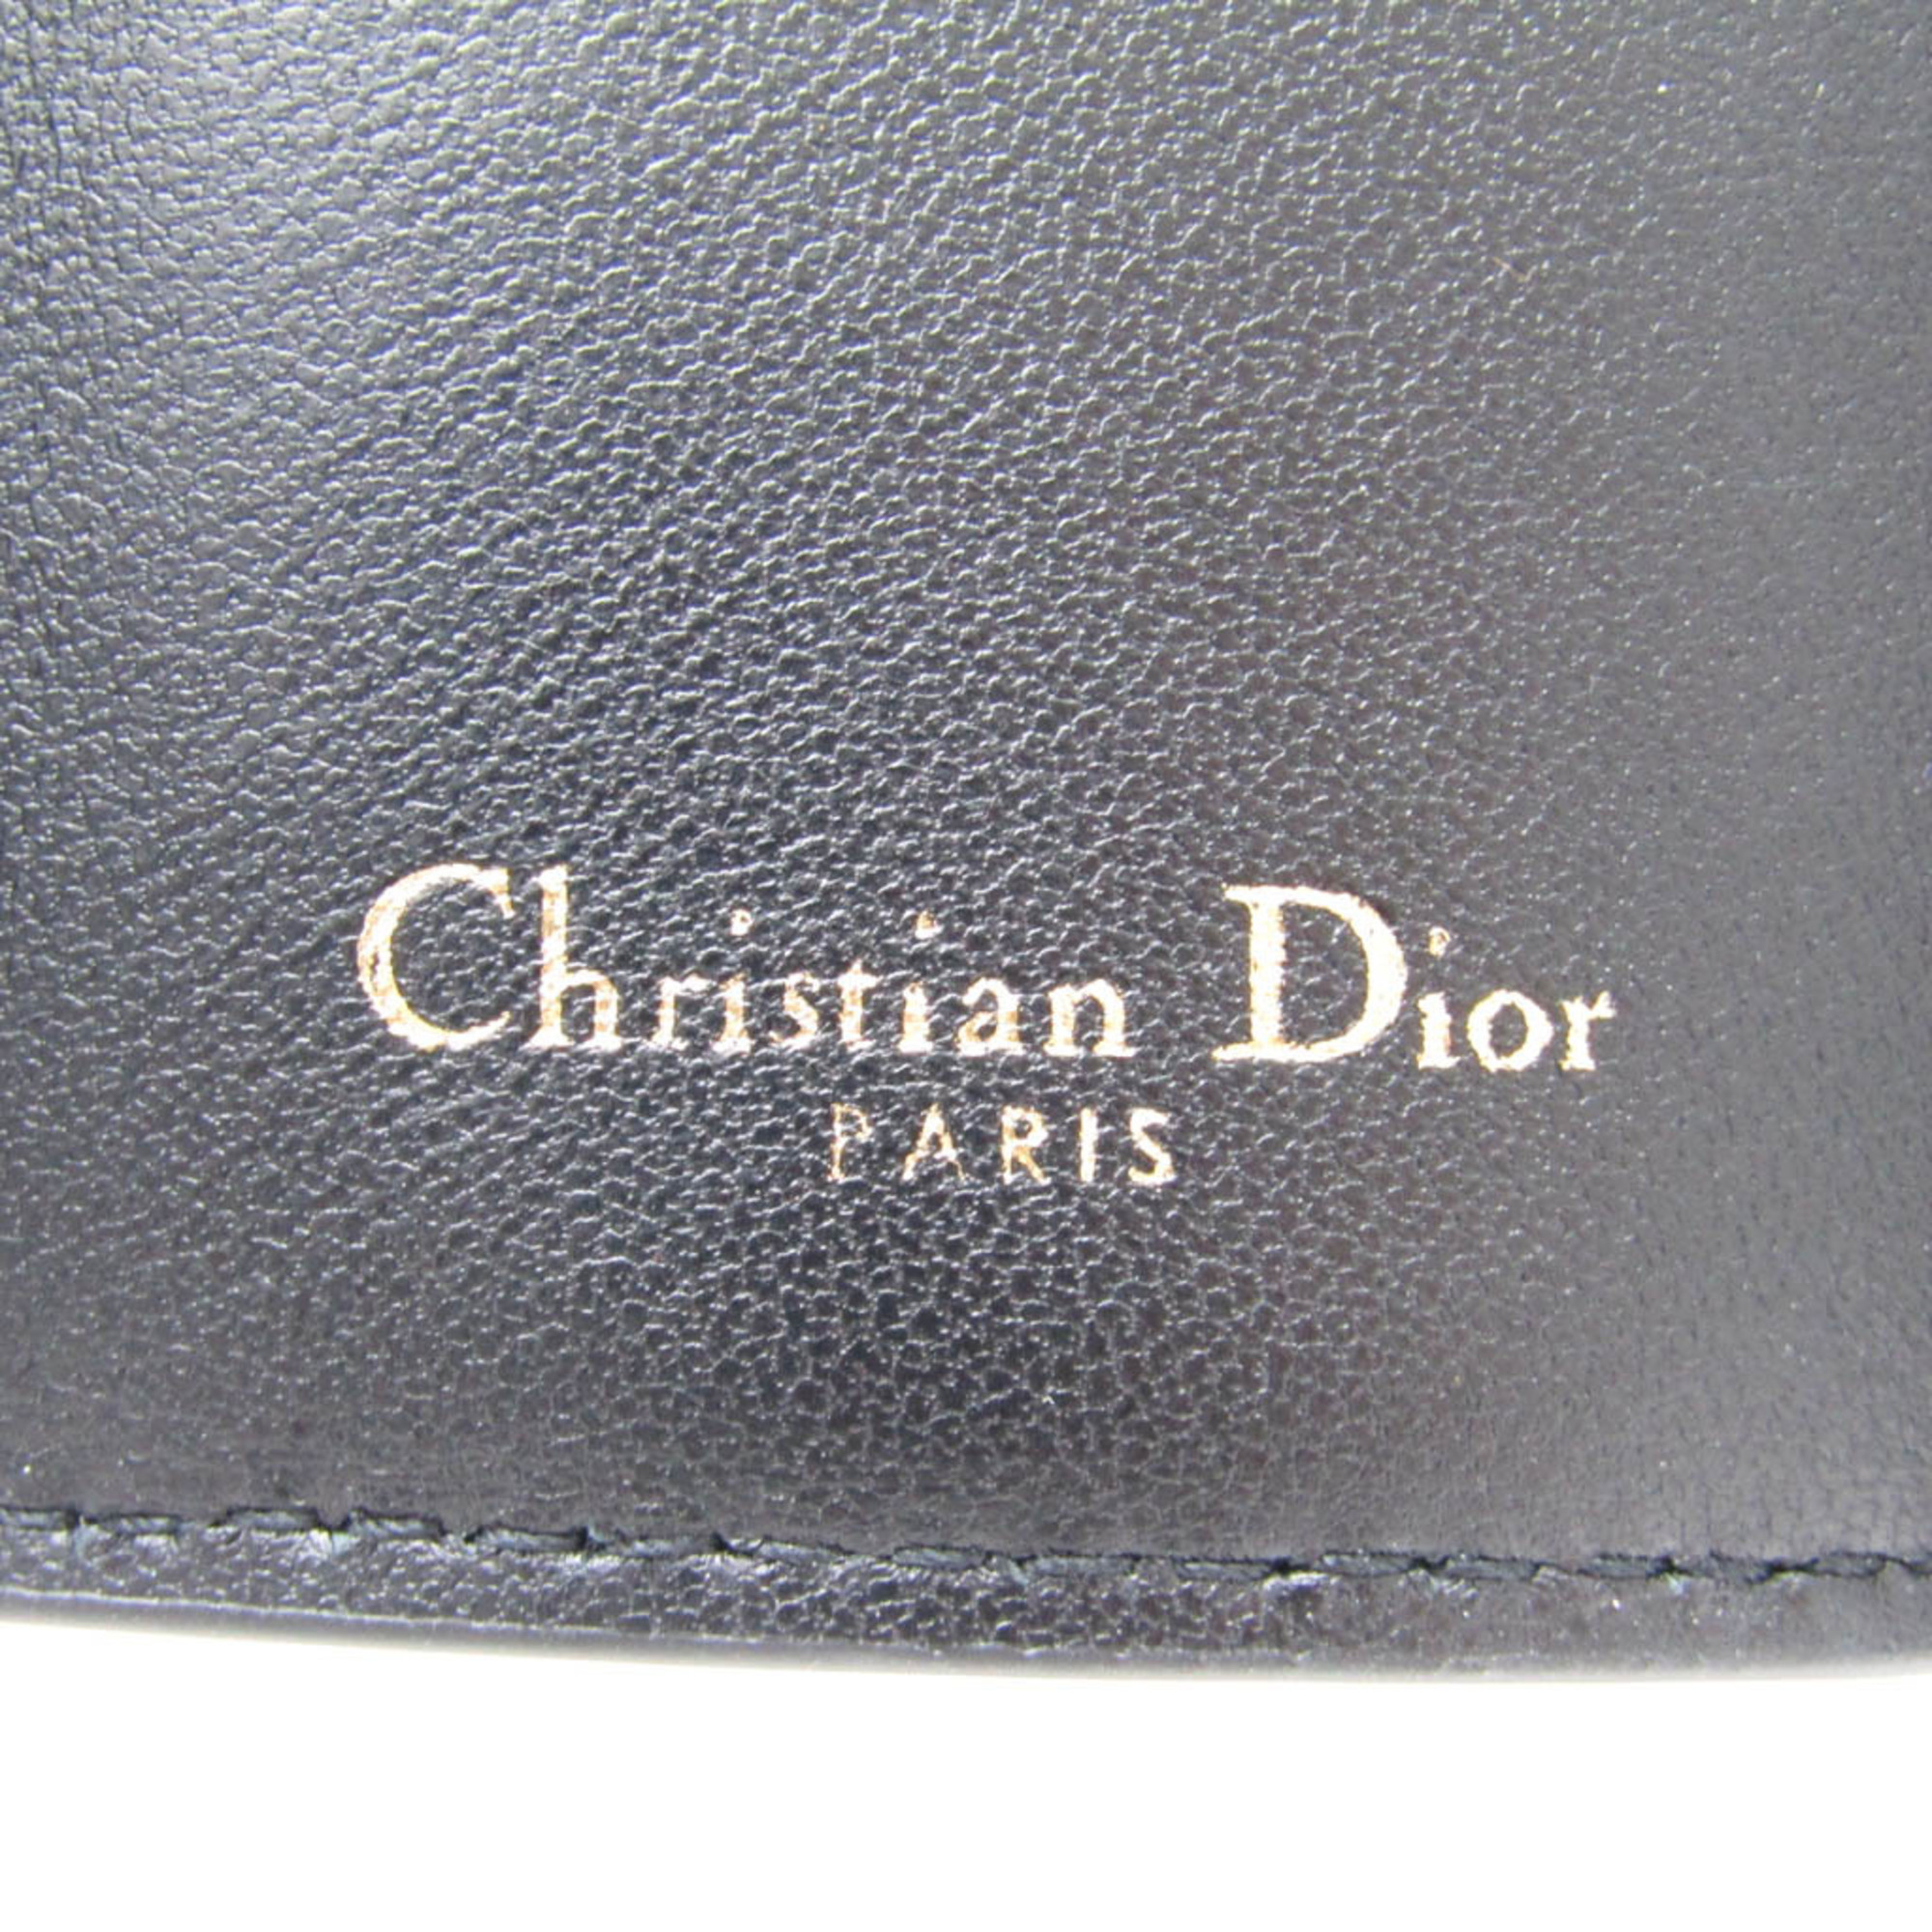 Christian Dior Saddle Compact Wallet S5653CBAA Women's Leather Wallet (tri-fold) Black